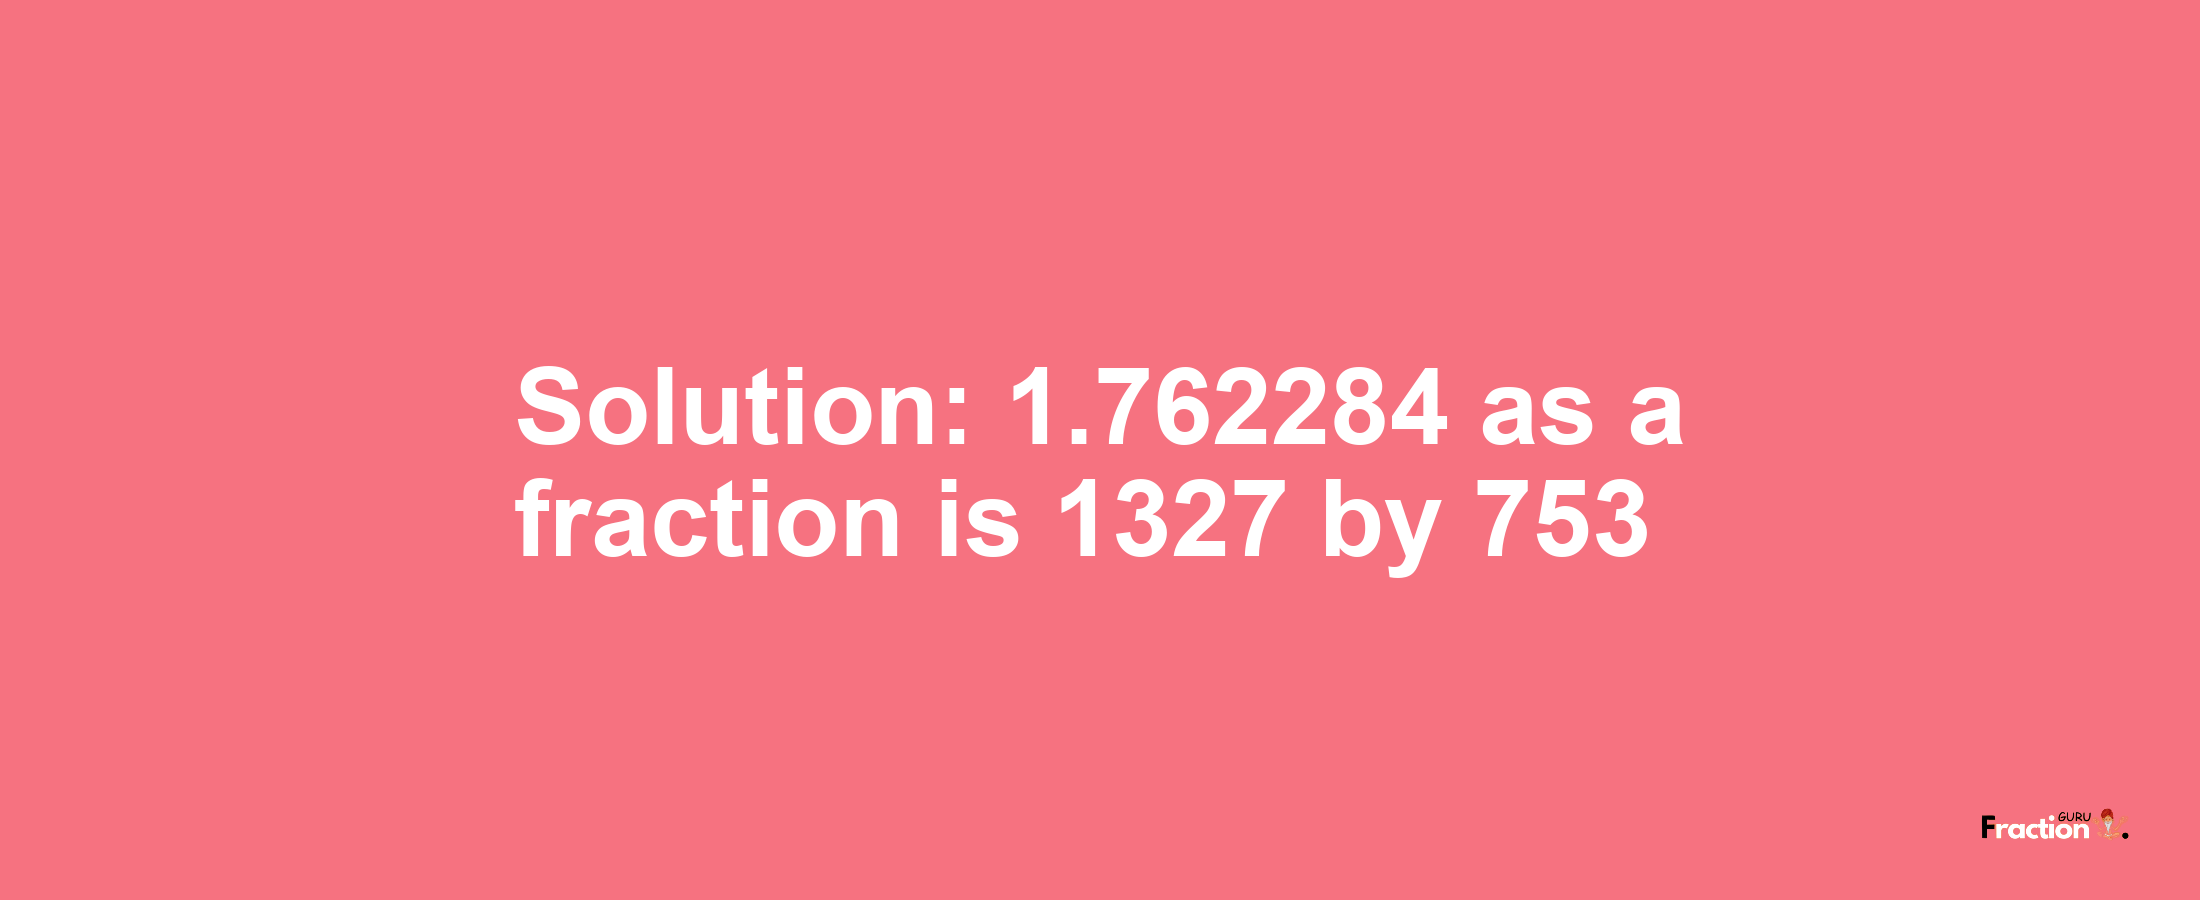 Solution:1.762284 as a fraction is 1327/753